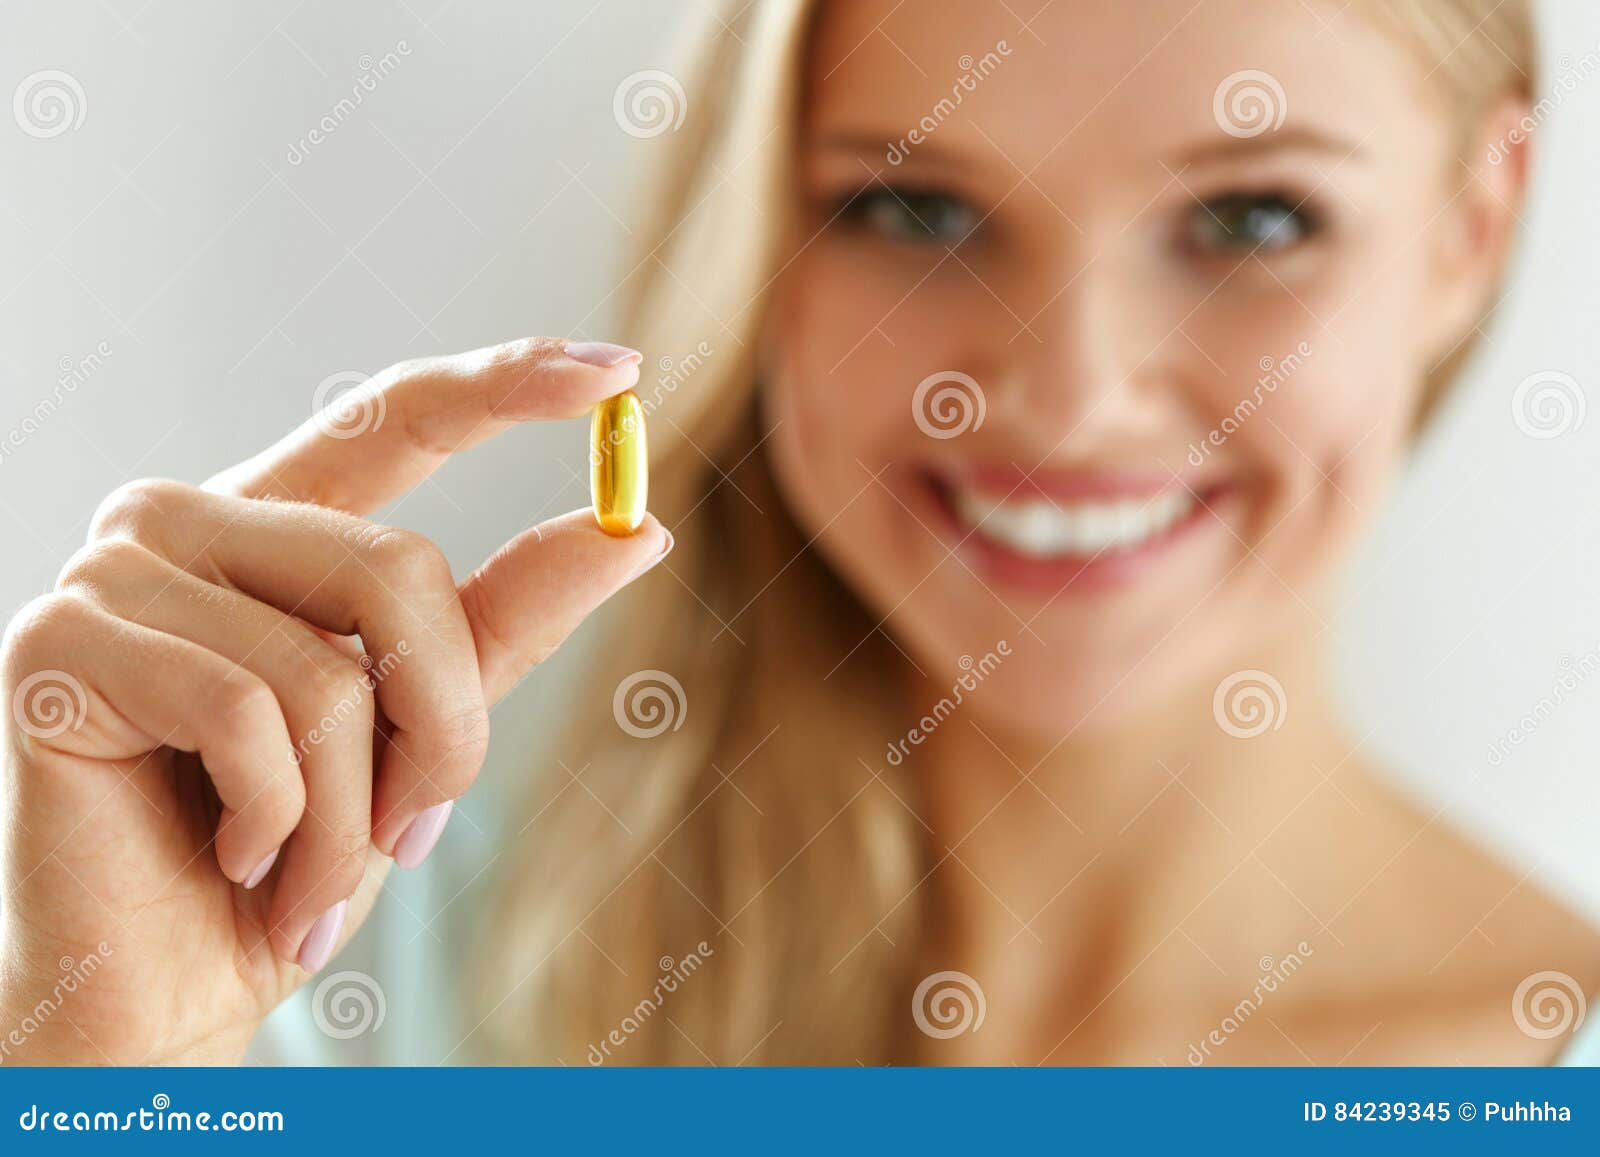 vitamin and supplement. beautiful woman holding fish oil capsule